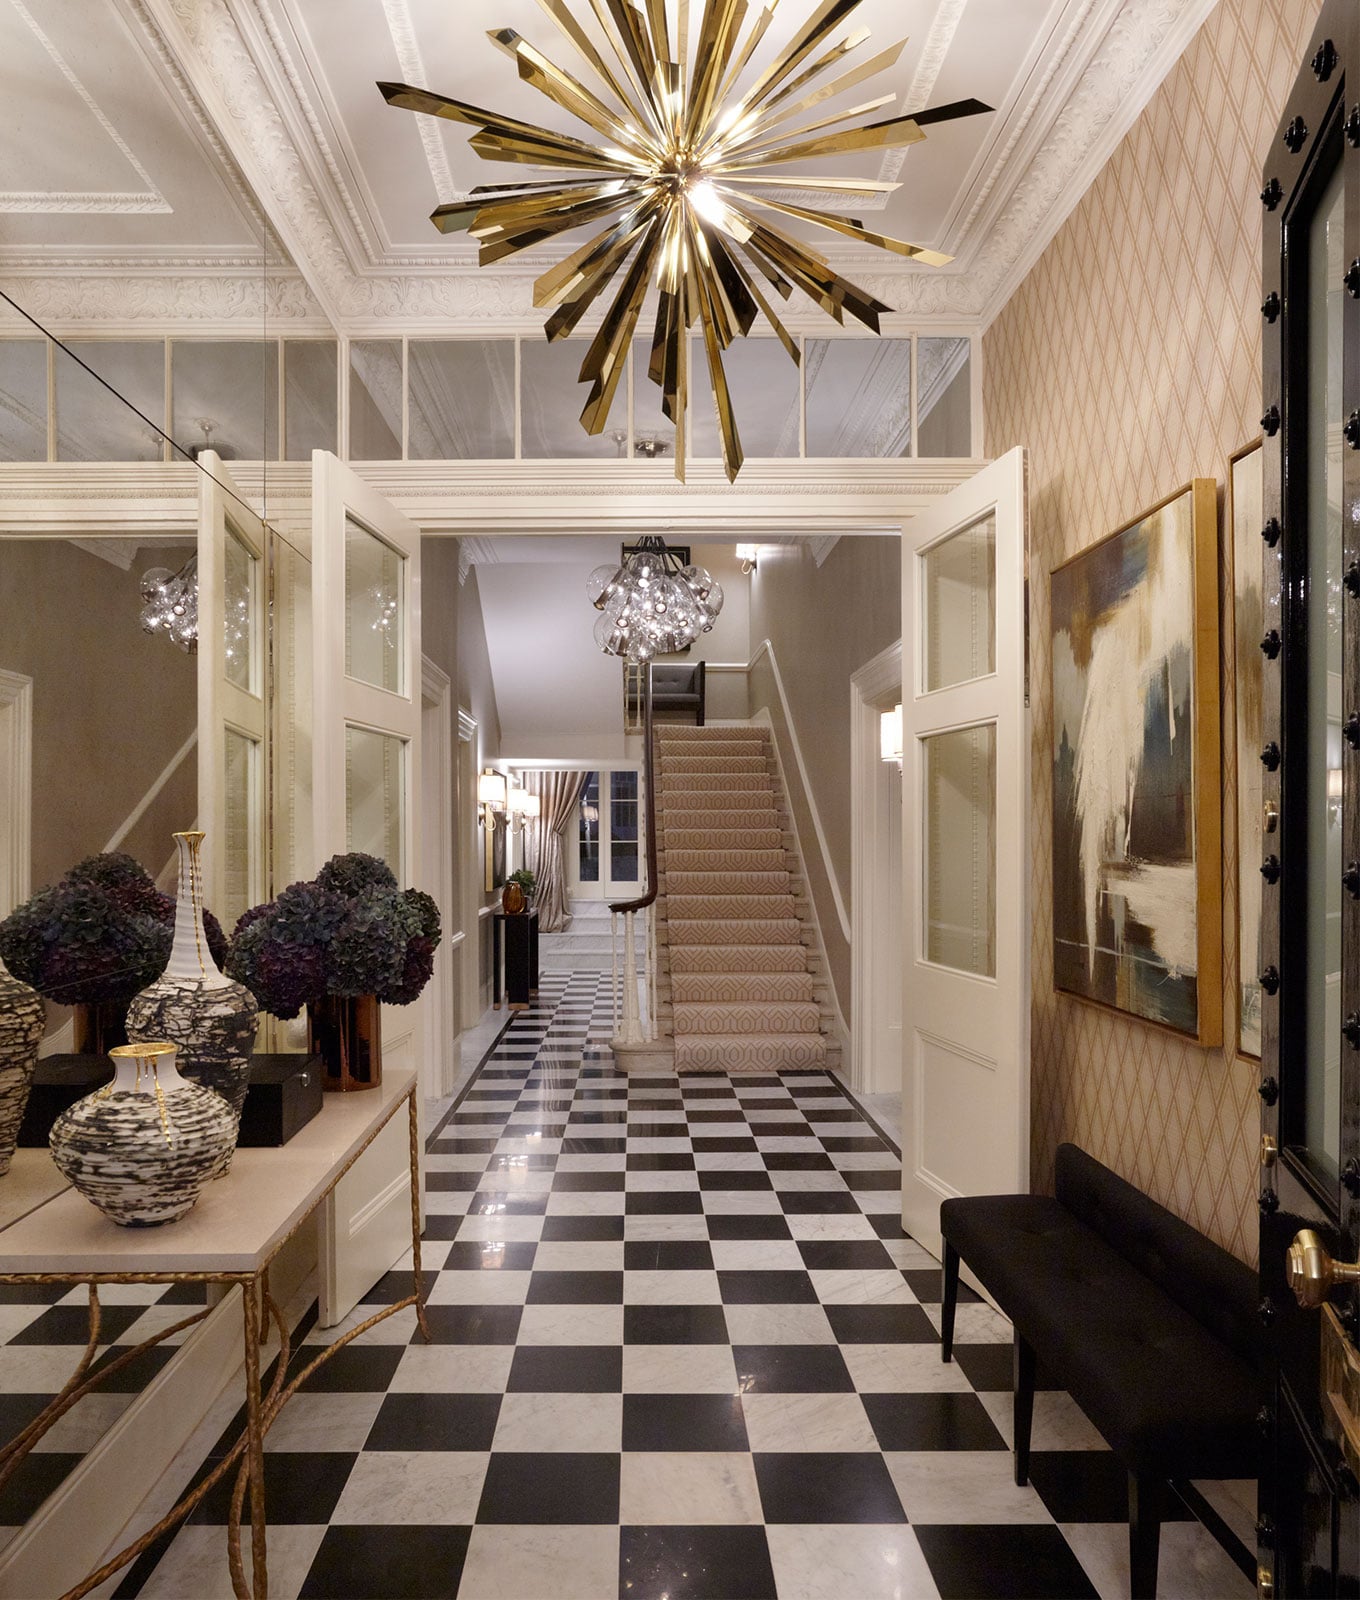 Entrance hall with dramatic sculptural chandelier